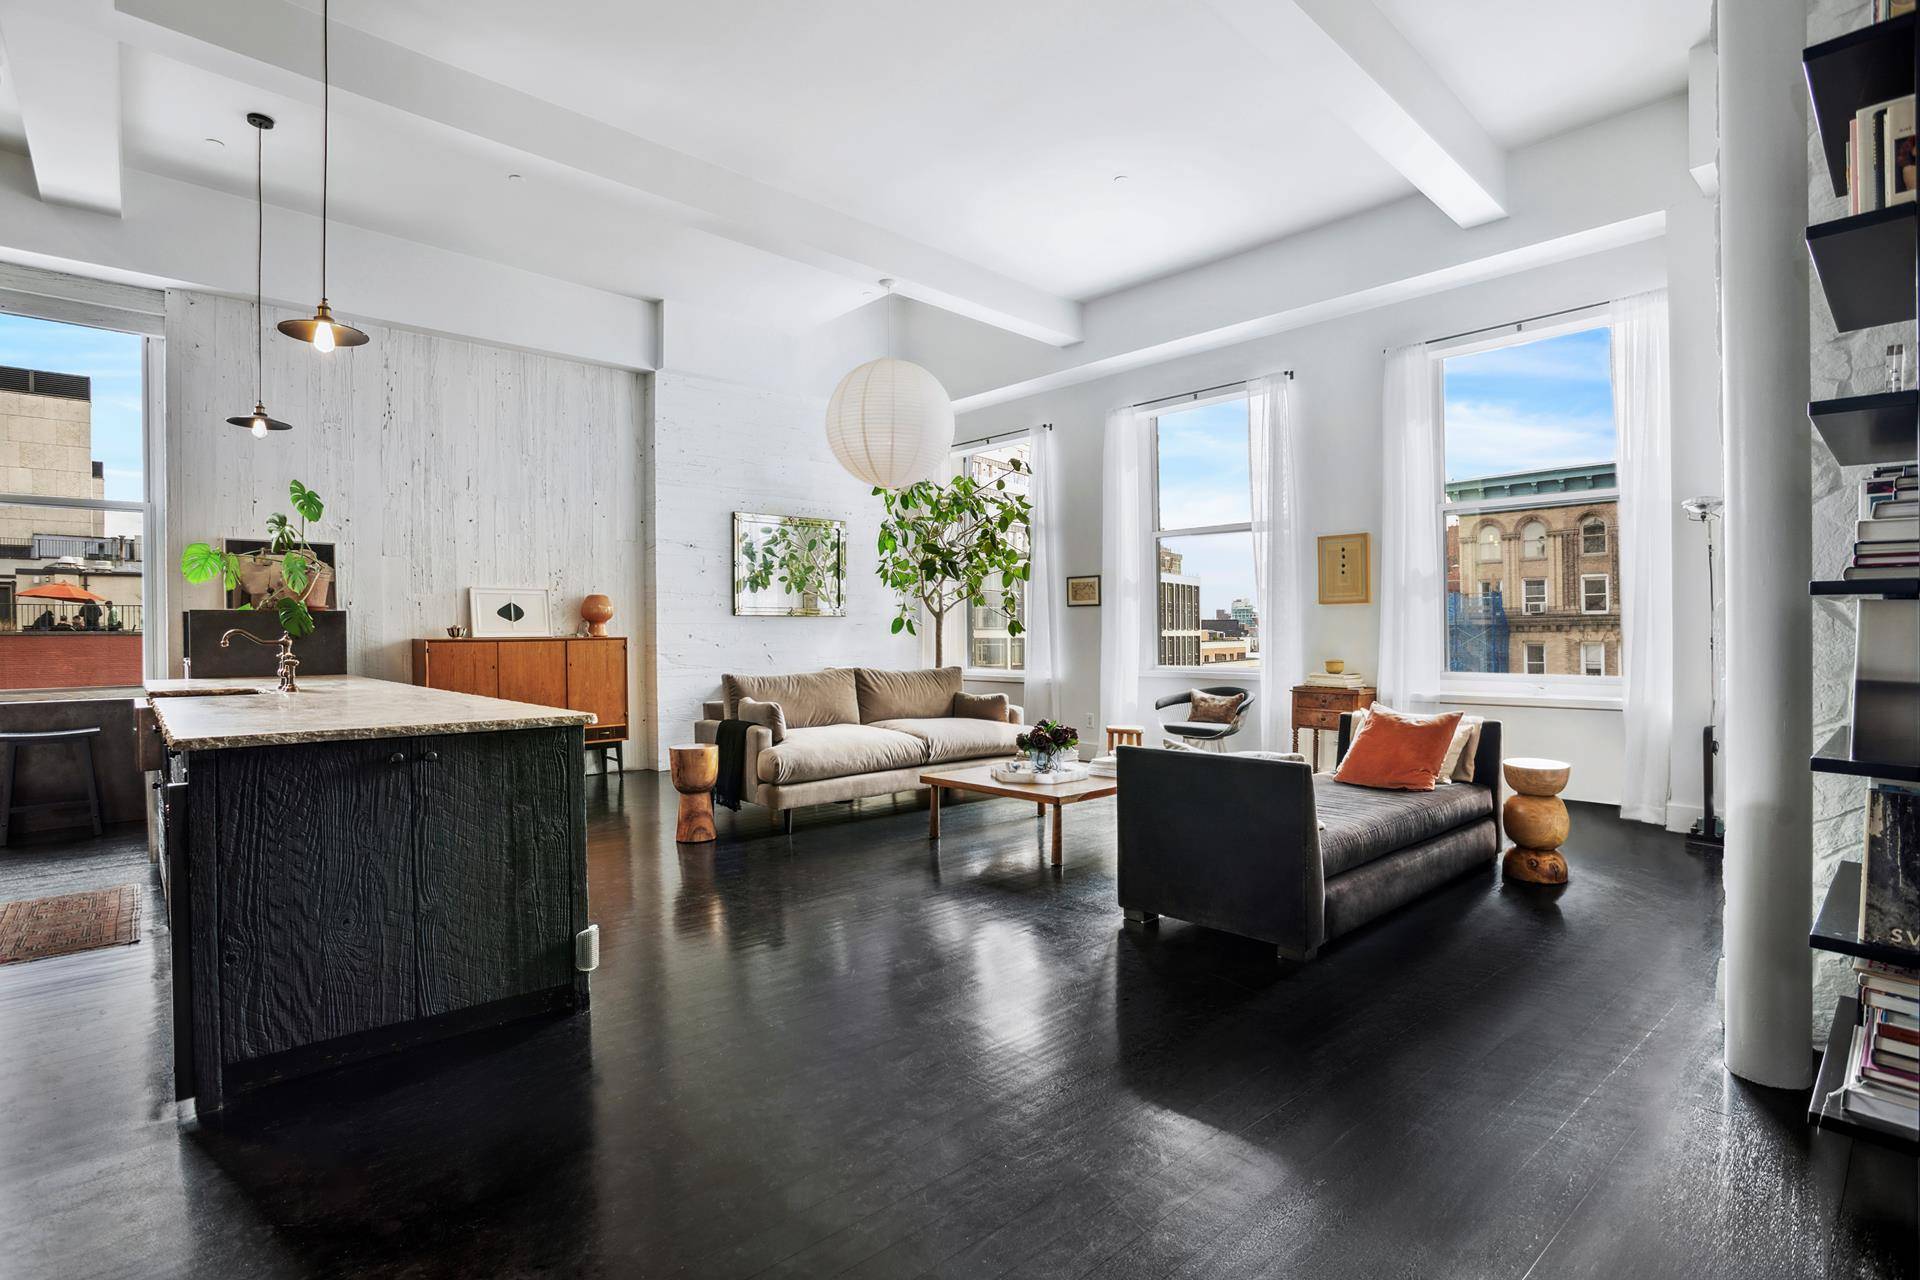 Located on one of the best blocks in NOHO, this 3067 sq ft CONDO PENTHOUSE offers 4 bedrooms with a bonus room on top with 3 exposures on a privately ...